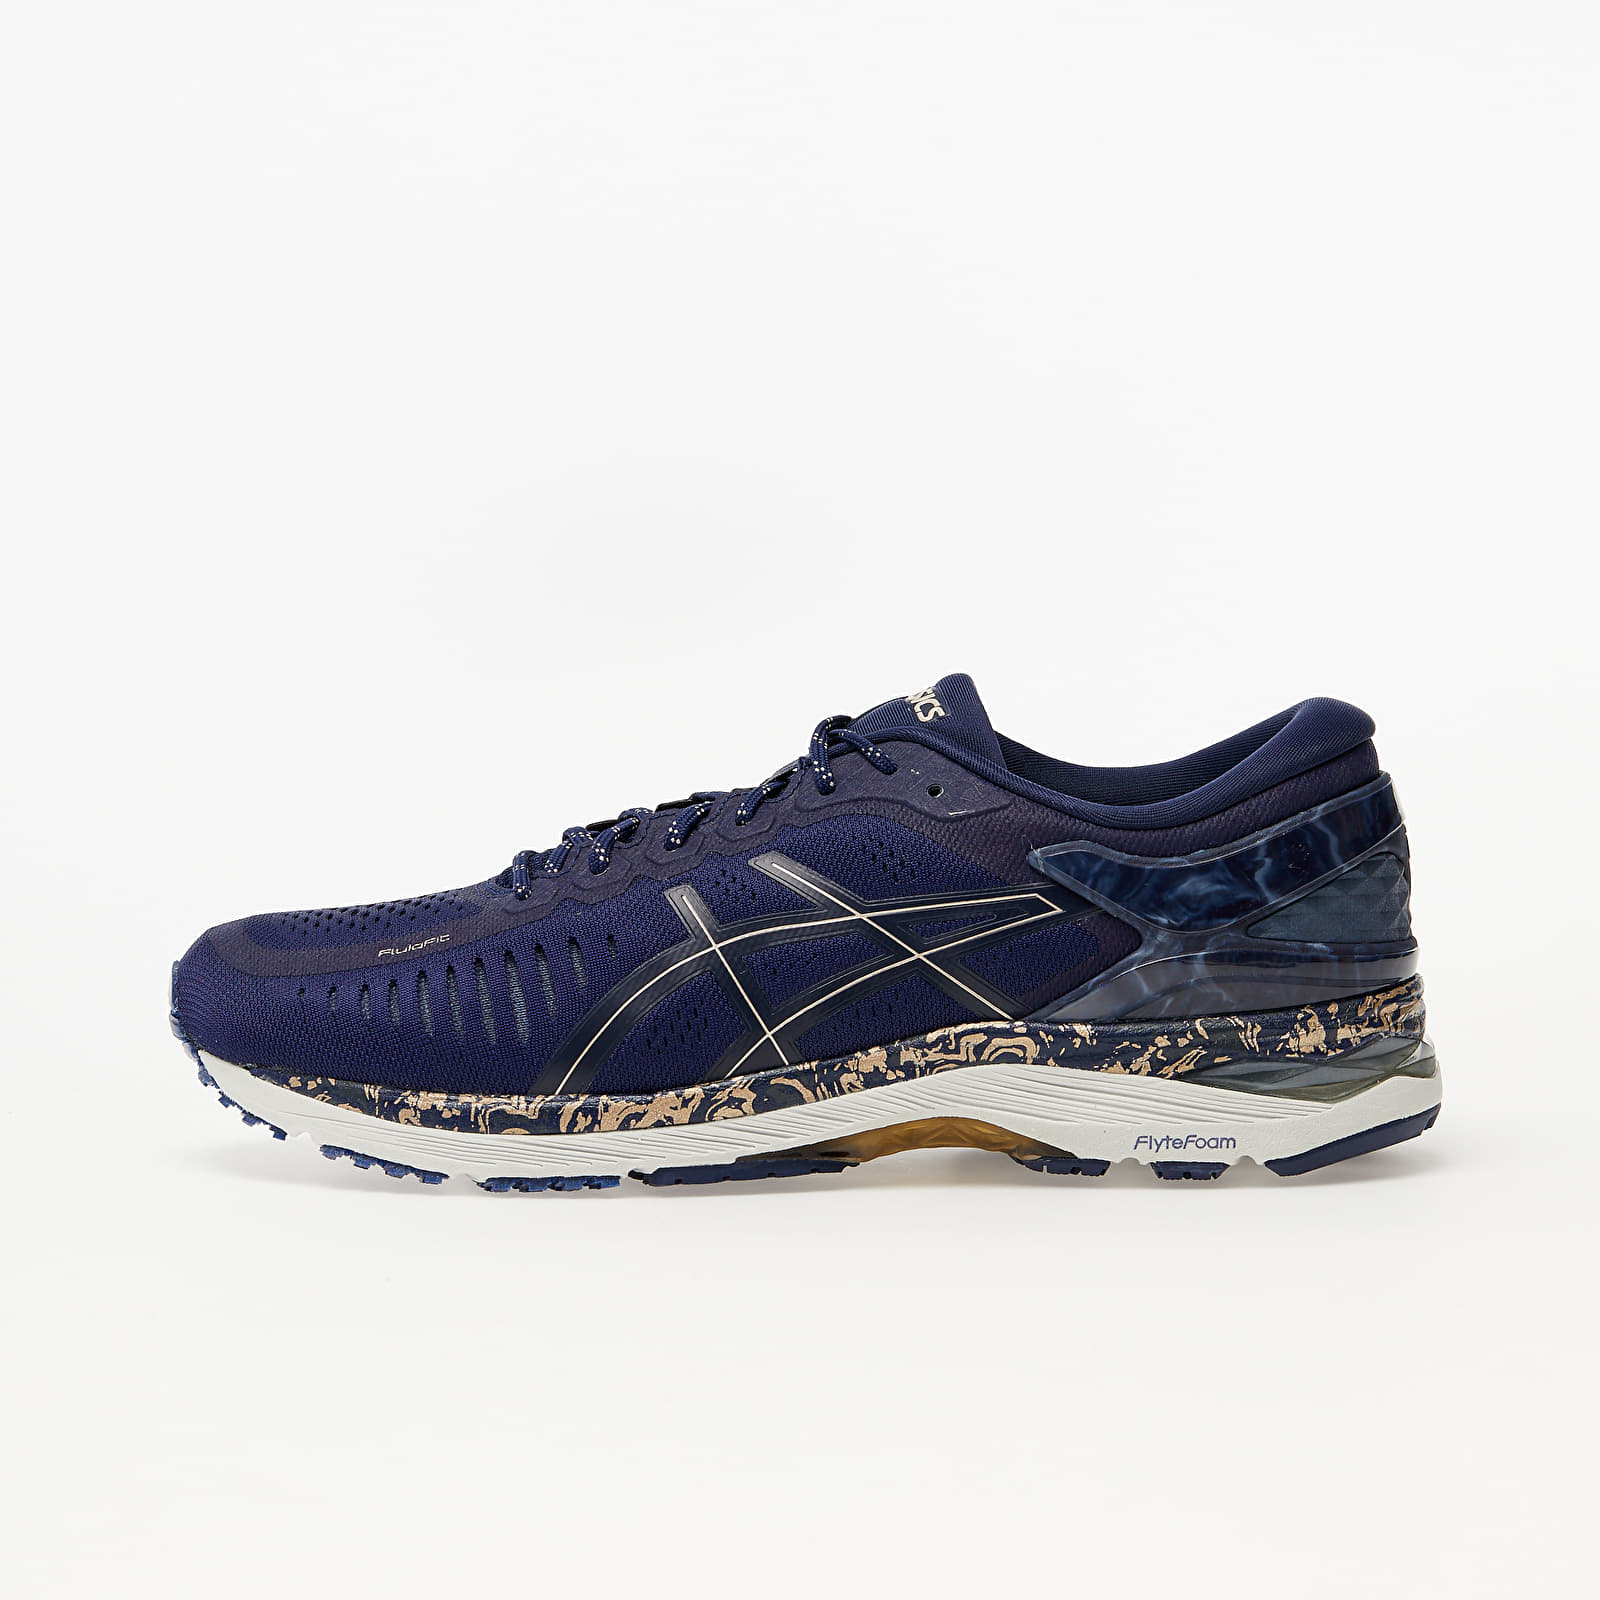 Men's shoes Asics MetaRun Peacoat/ Frosted Almond